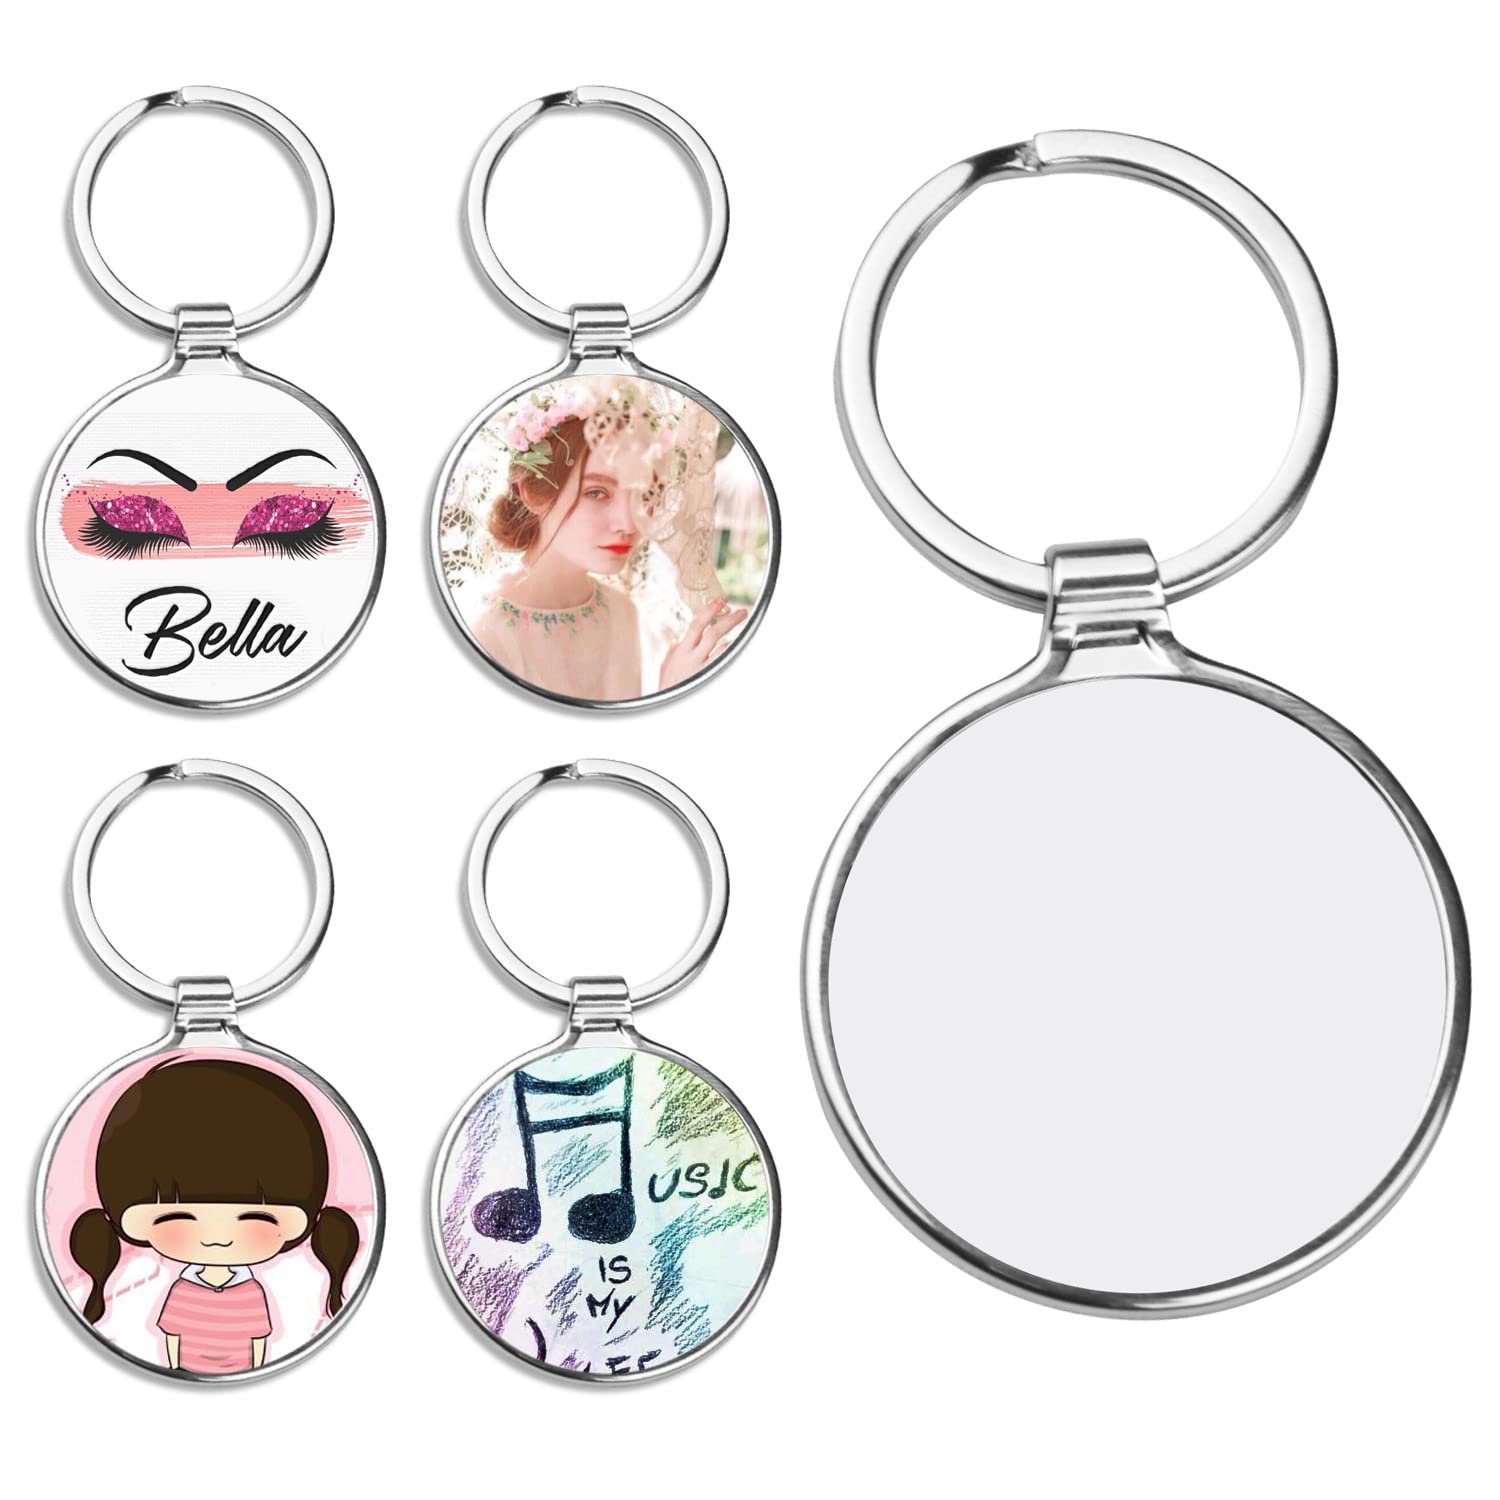 O BOSSTOP 10PCS Sublimation Blanks Keychains Metal Round Key Rings